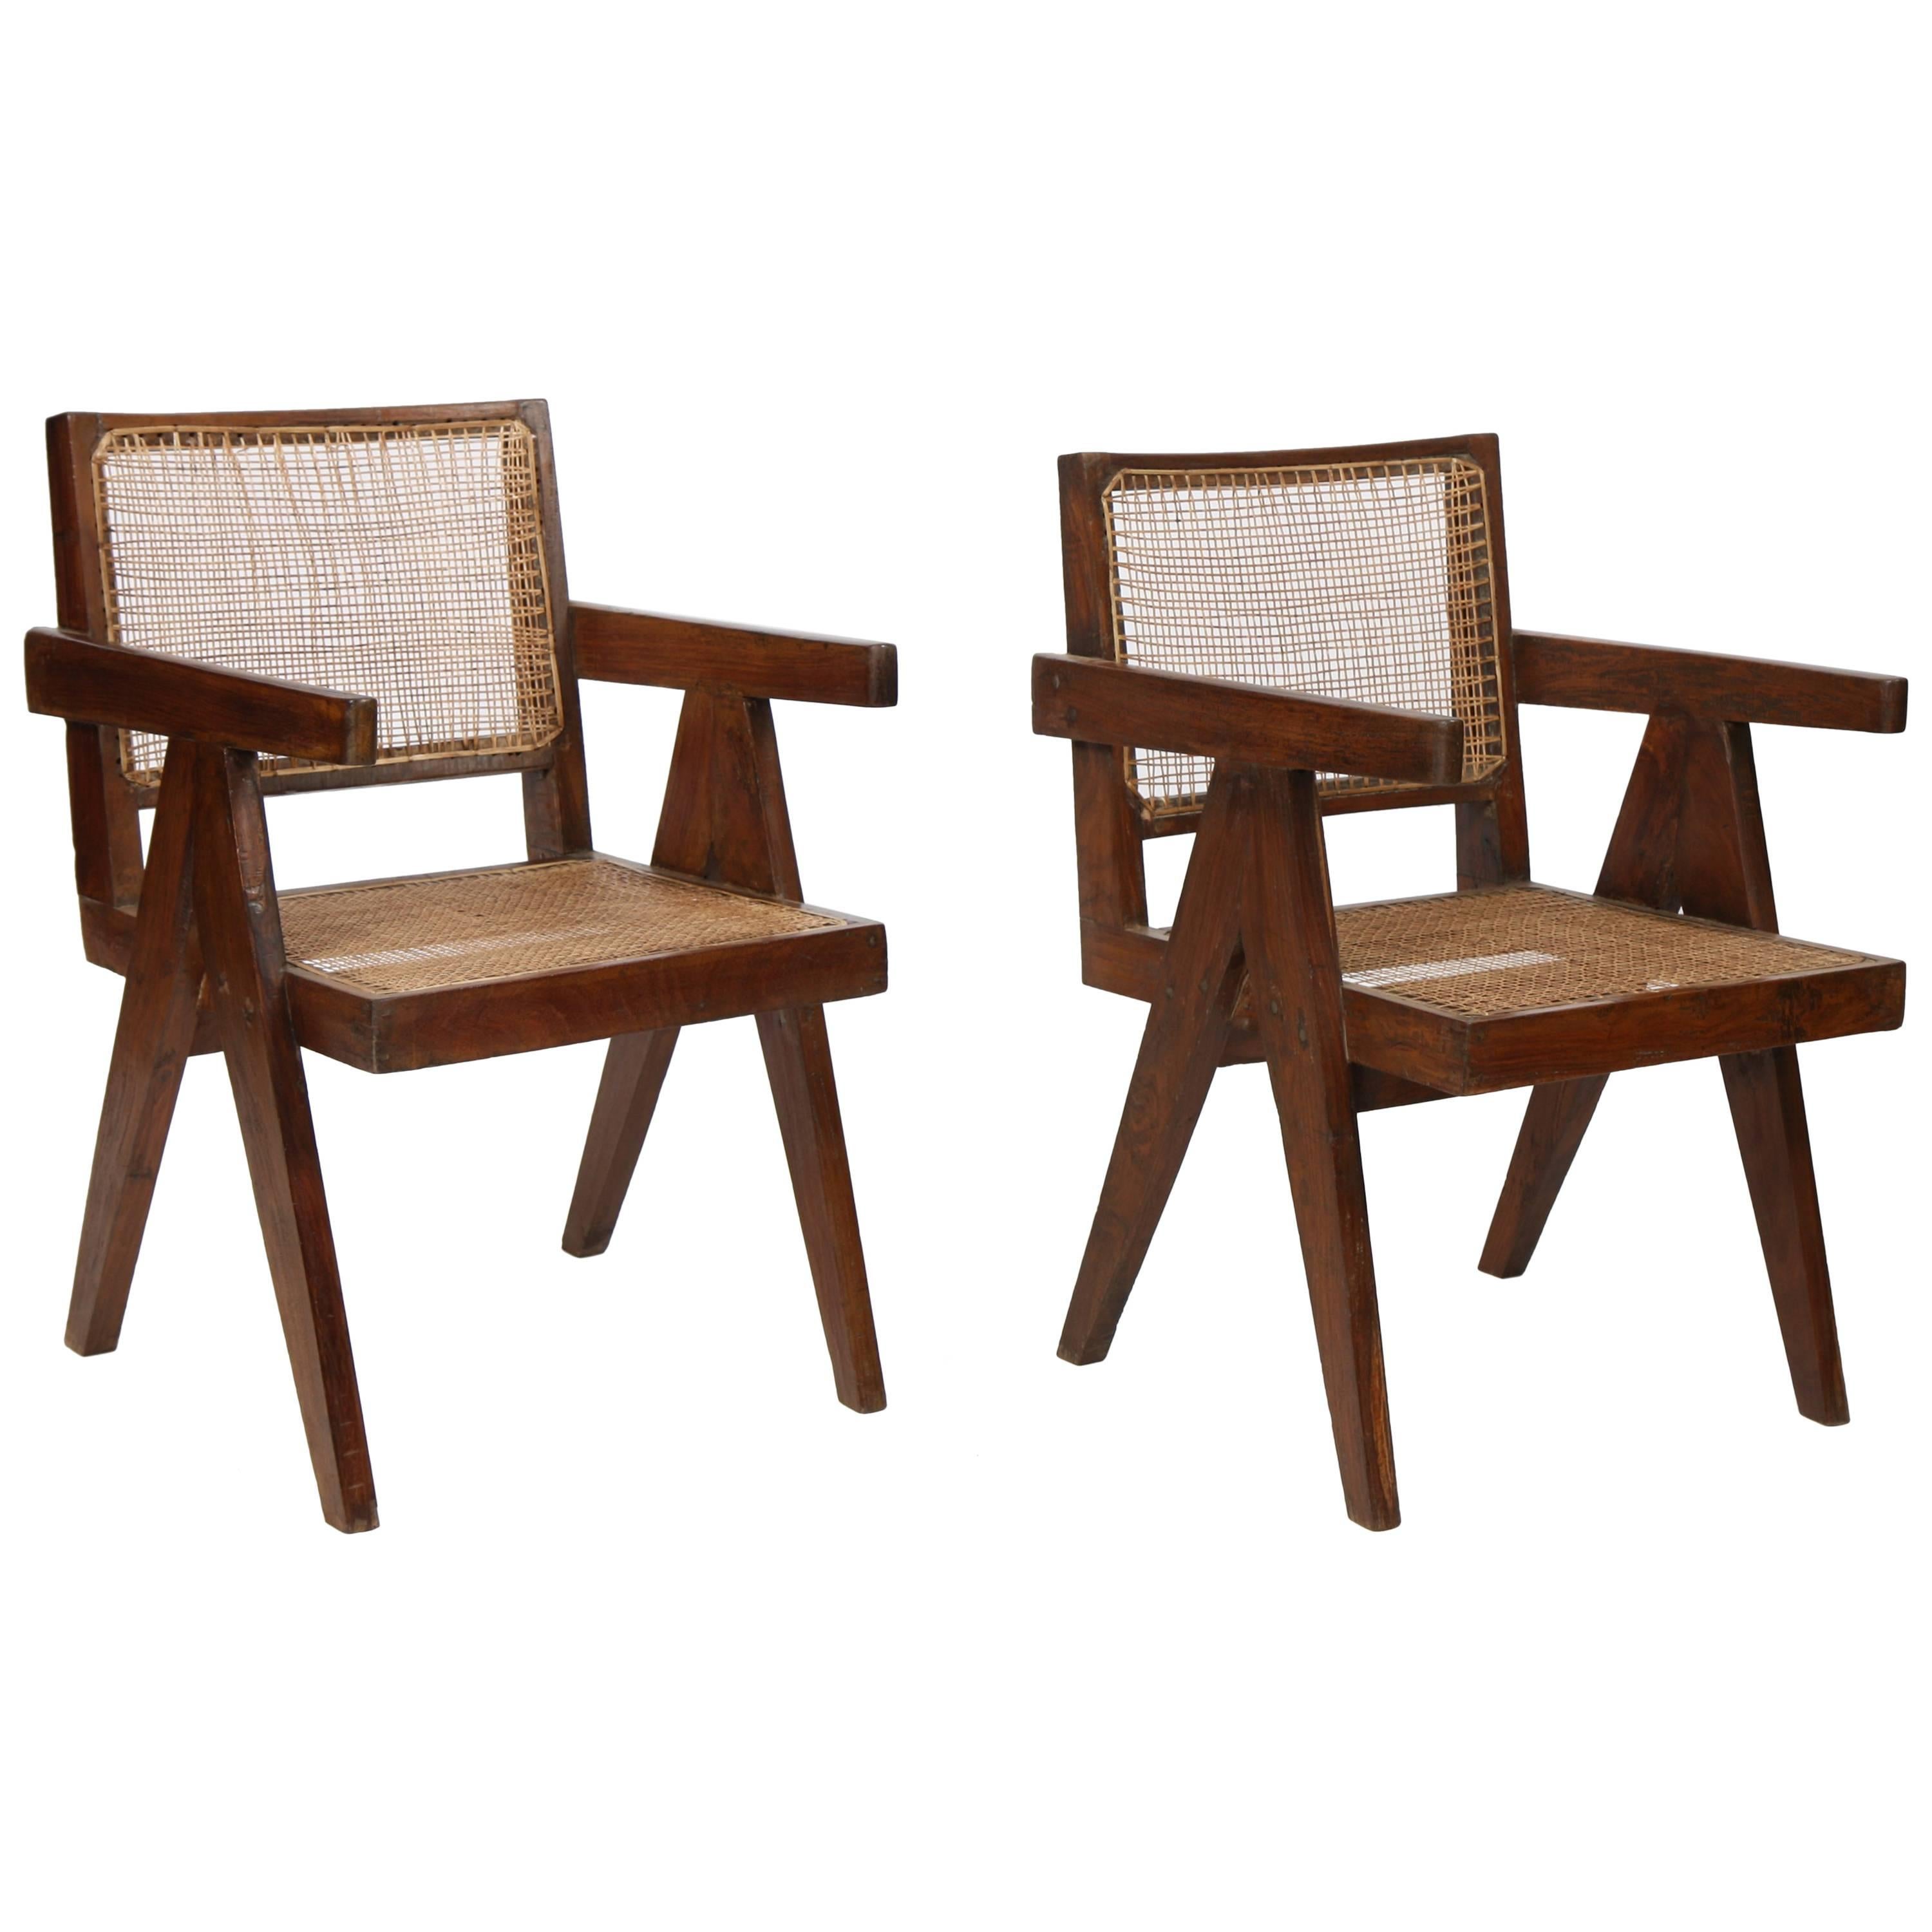 Set of Two Armchairs Called "Office Cane Chairs" from Pierre Jeanneret